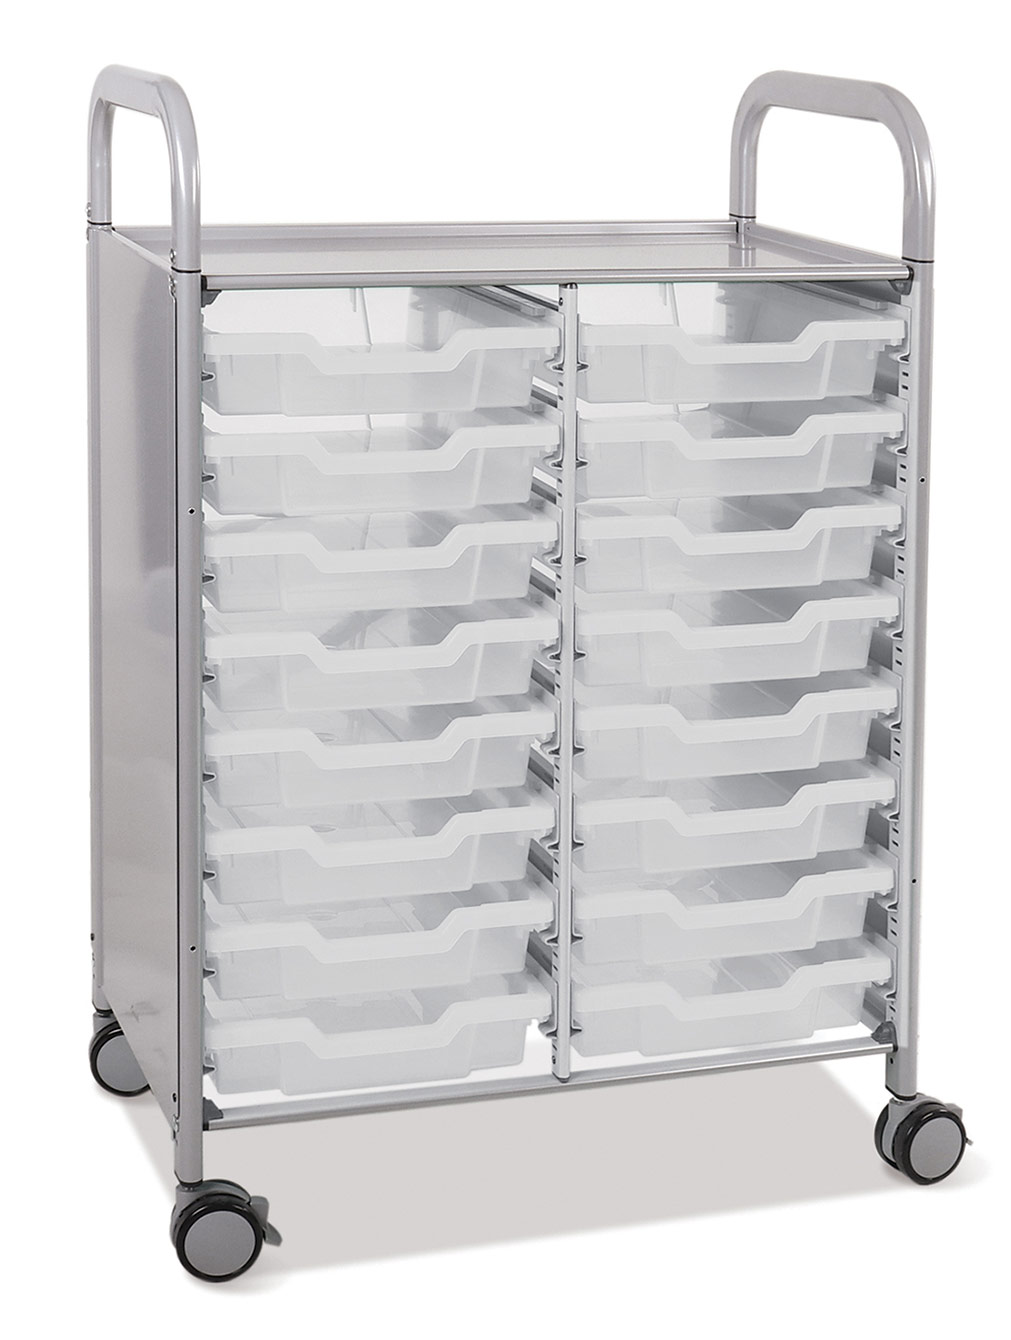 Shield Plus Gratnells Trolley Trays 16 Double - Callero Shallow